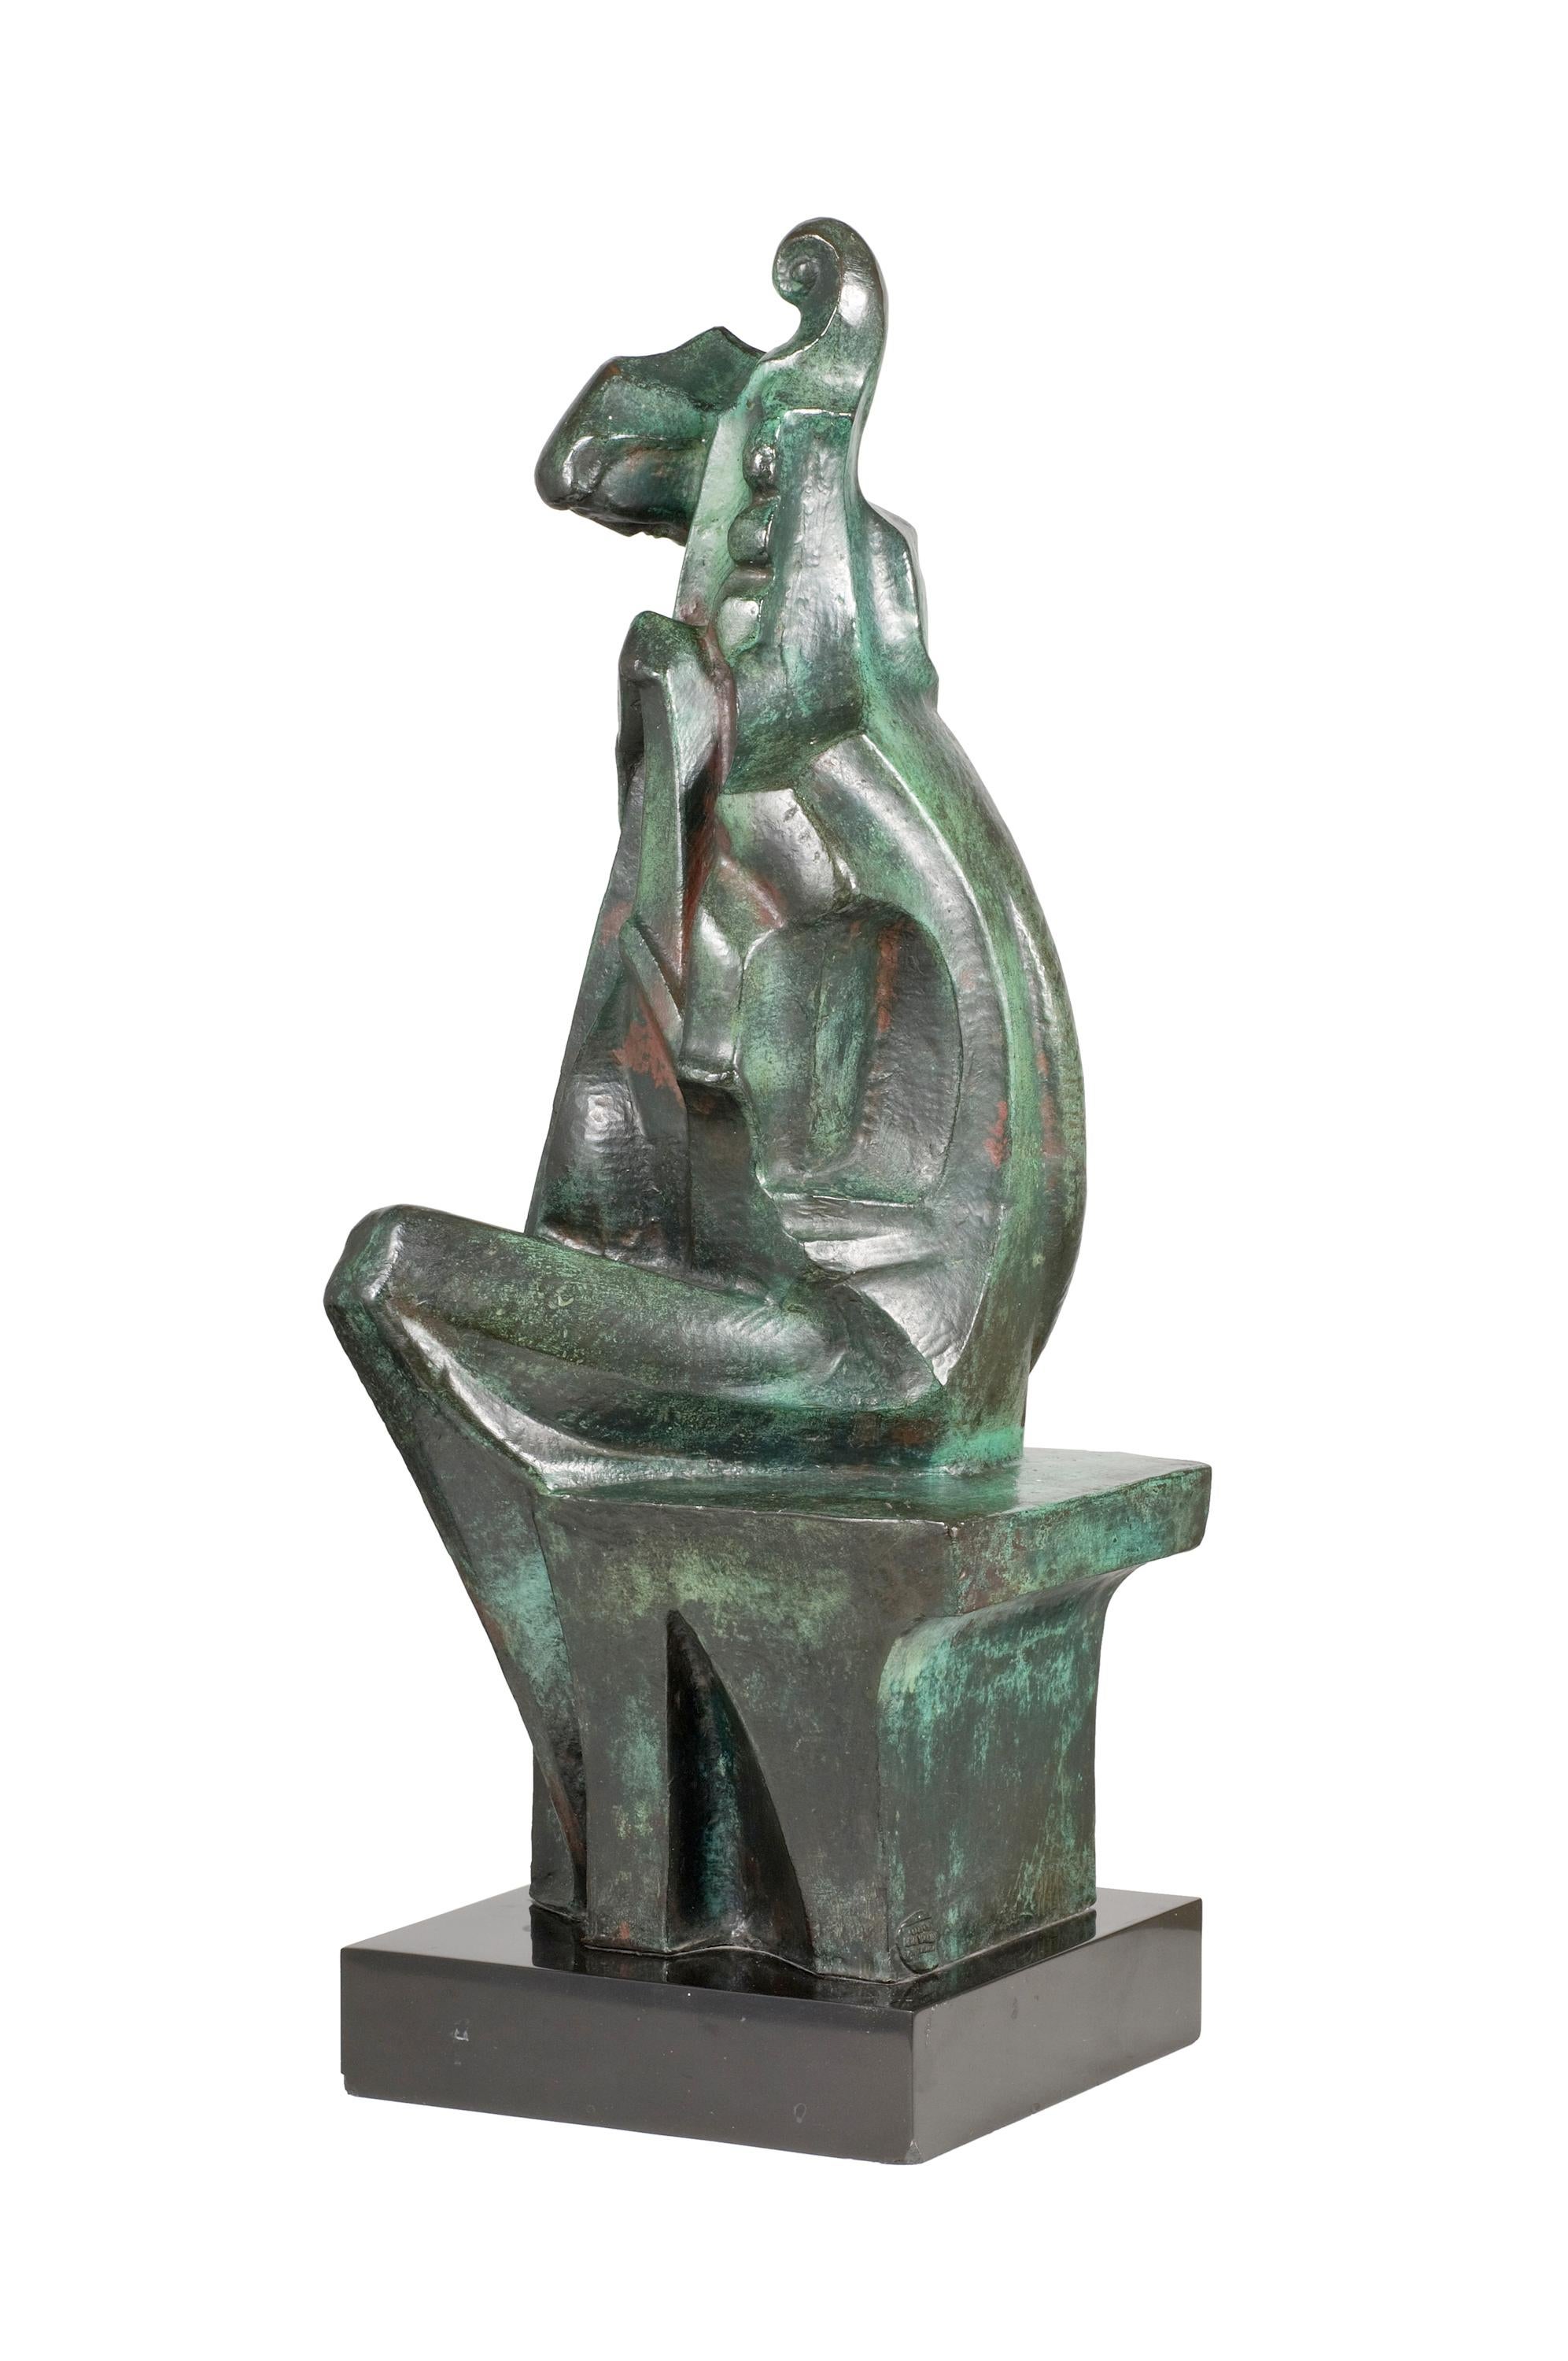 Albert Wein is one of America's great sculptors of the modernist period.  Like Paul Manship he won the Prix de Rome and he traveled there to study.  His early works were in the WPA and the Deco style.  He then kept with the times and explored other